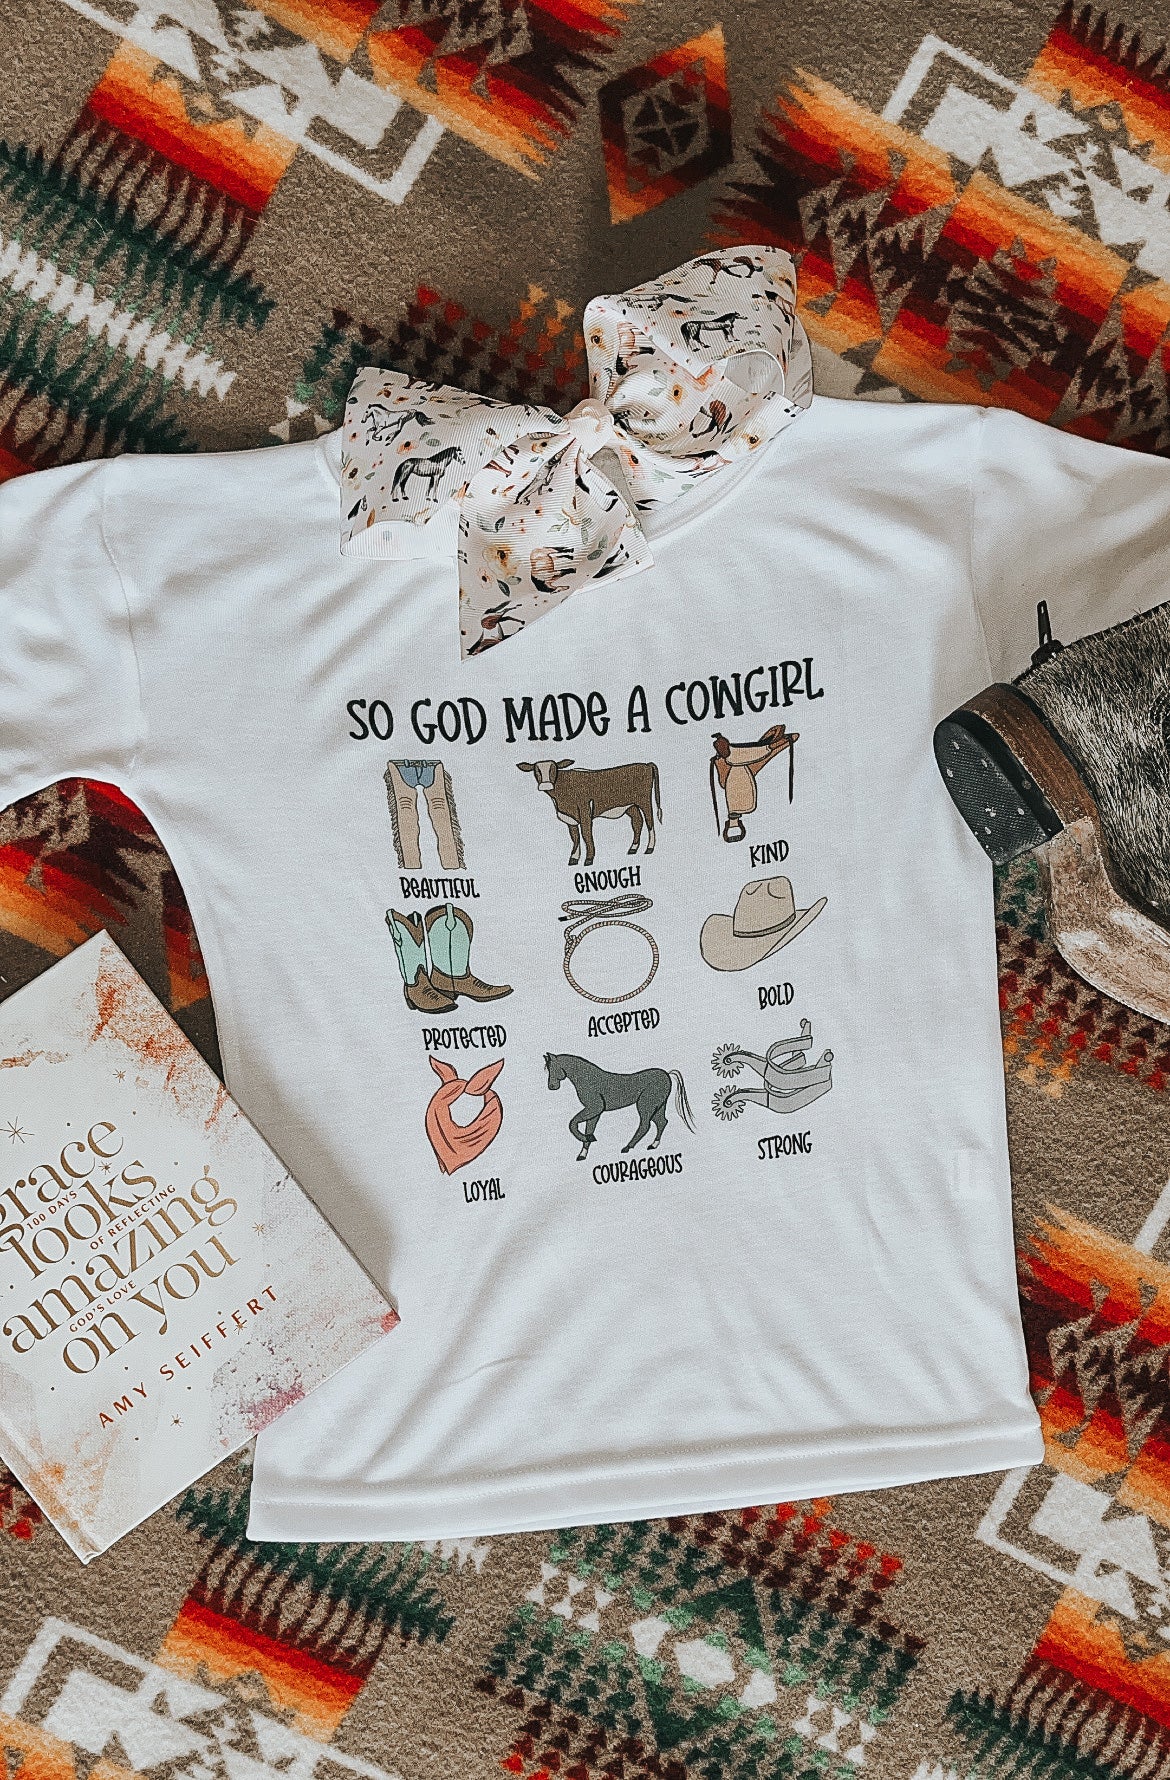 the So God Made a |CowGirl| tank or tee